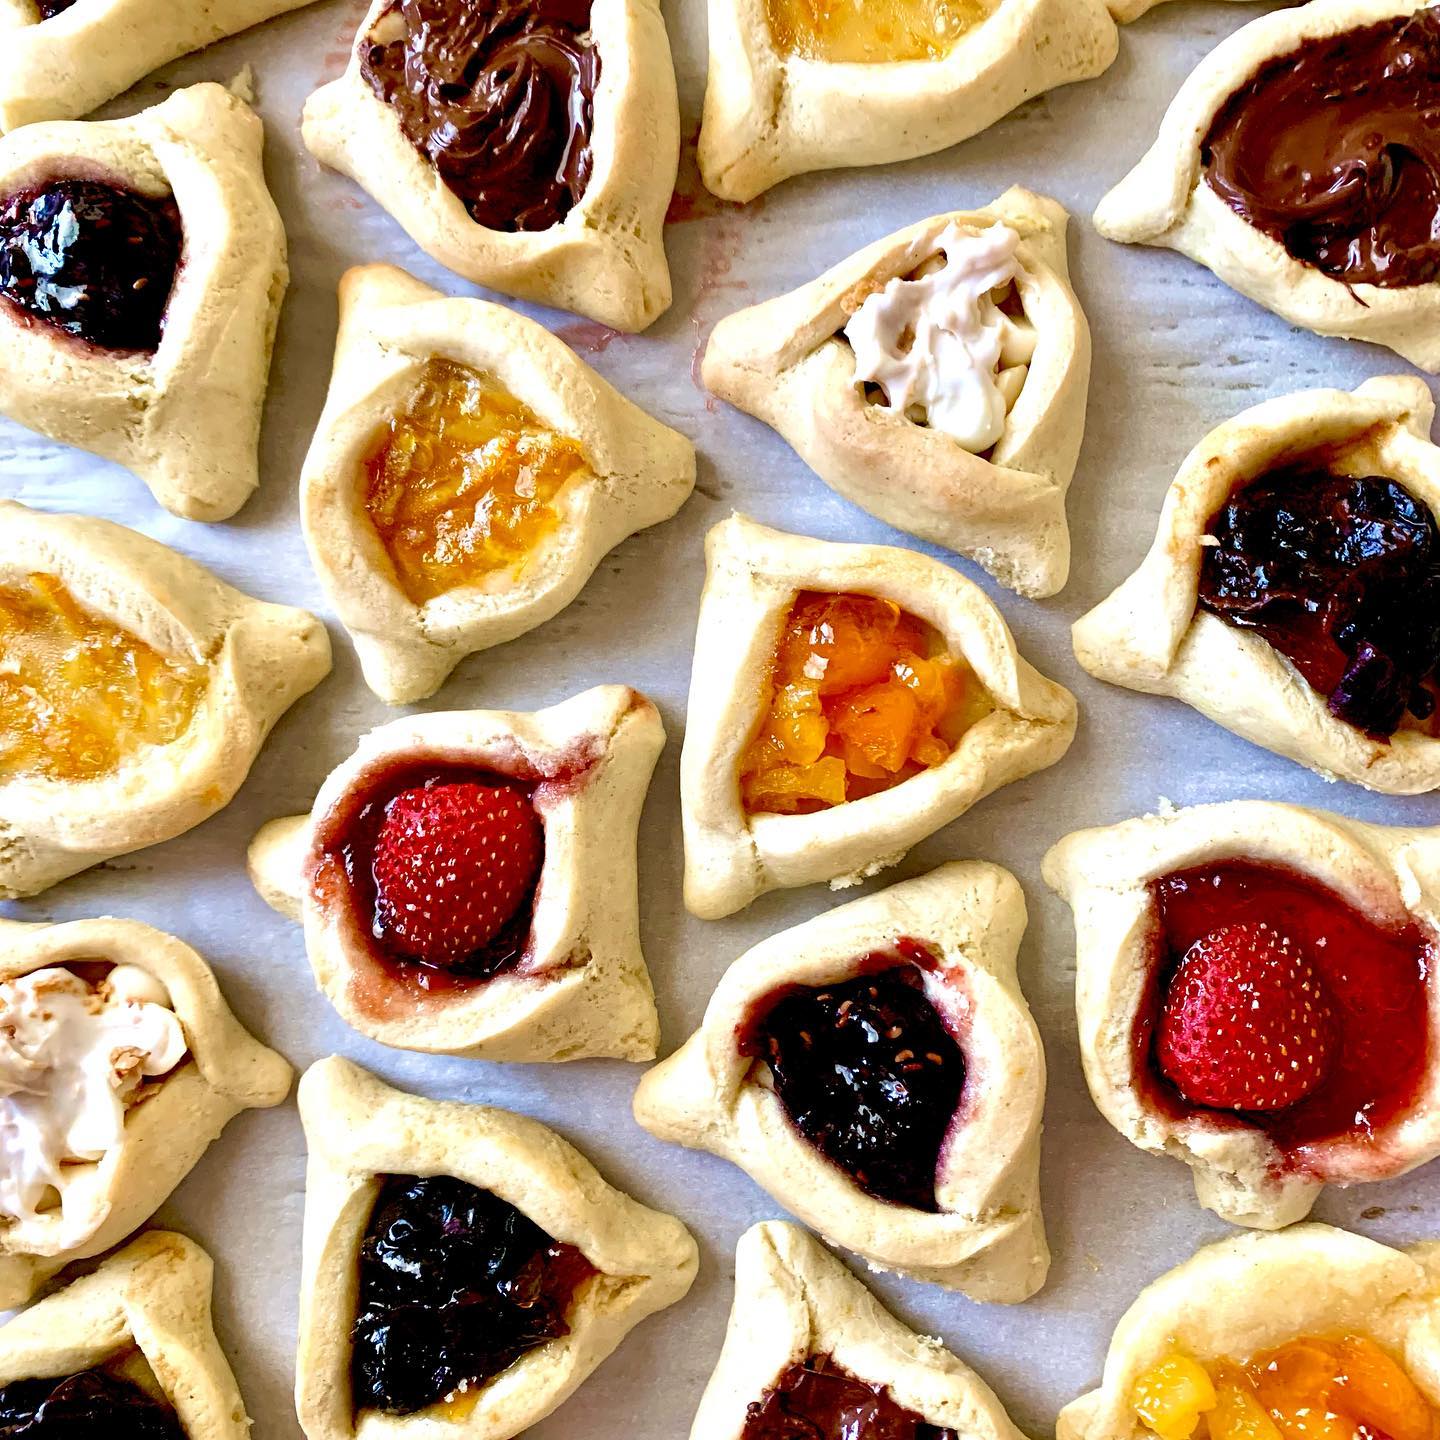 Both the Fine Print Bakery in Cumming and Buenos Dias Cafe at the Met in Atlanta are participating in the international bake sale Hamantashen for Ukraine. 